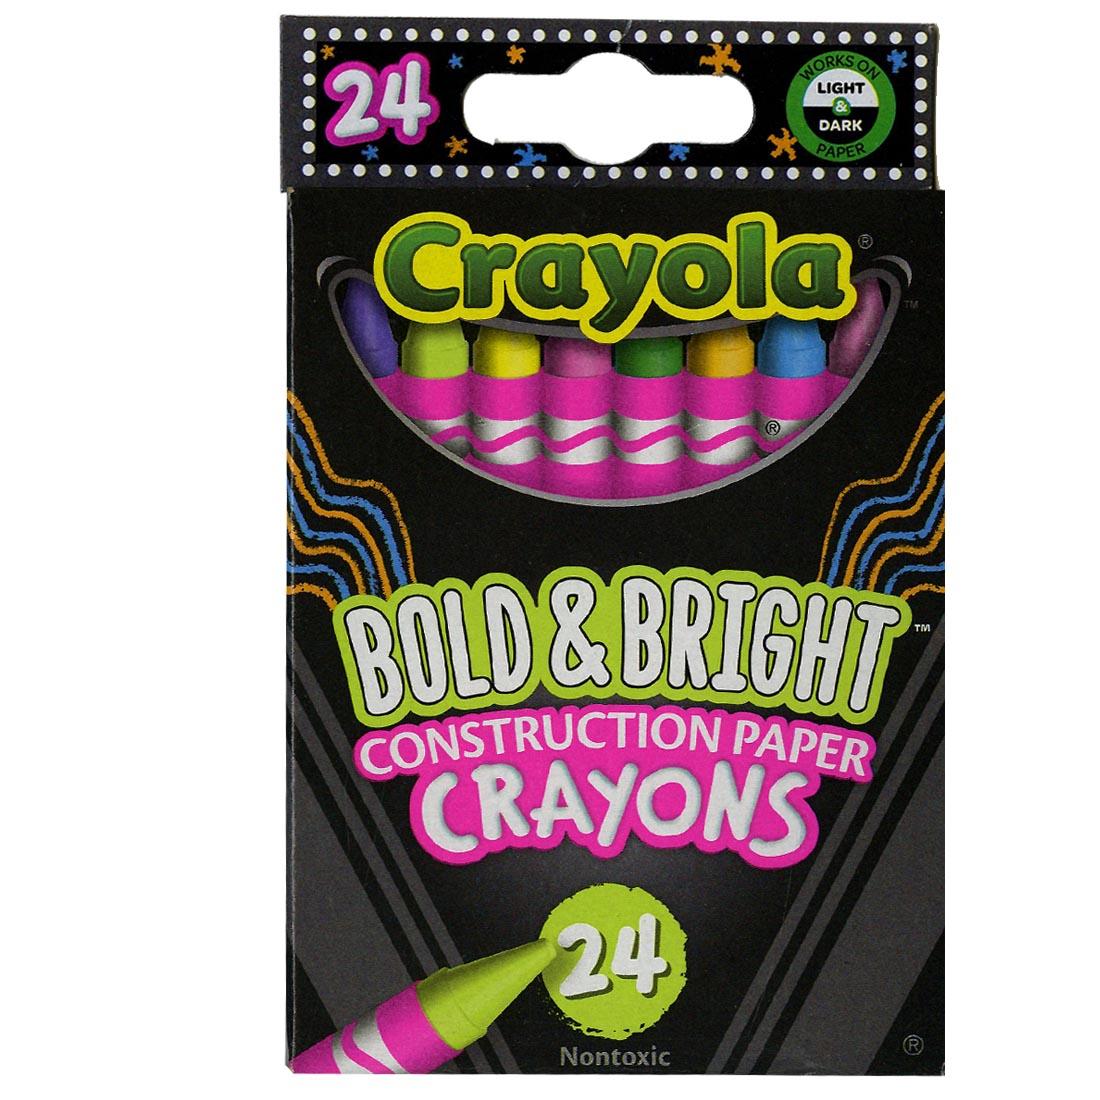 Crayola Bold & Bright Construction Paper Crayons 24-Count package